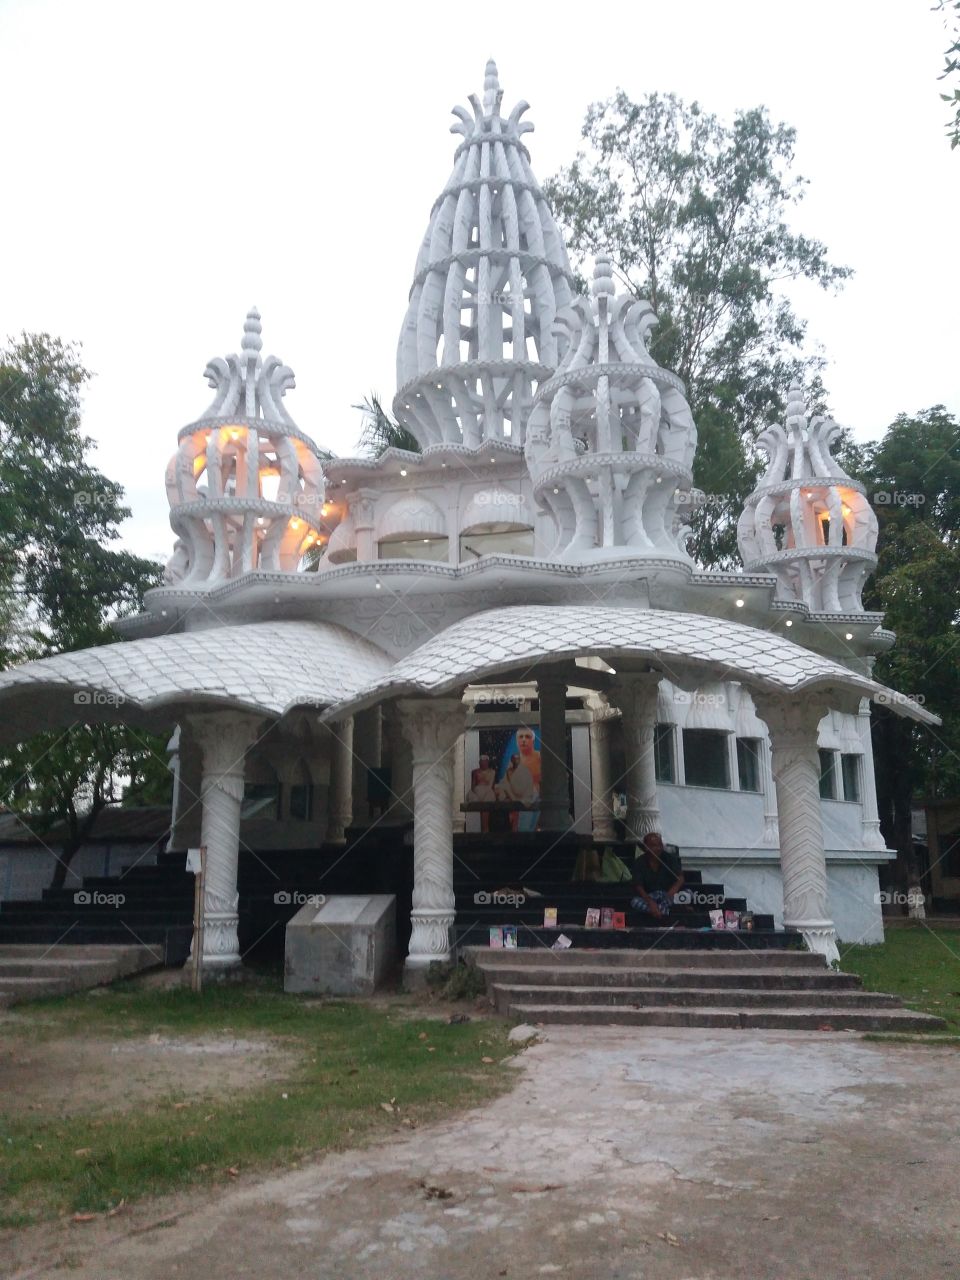 Anukul Thakur's temple in bd